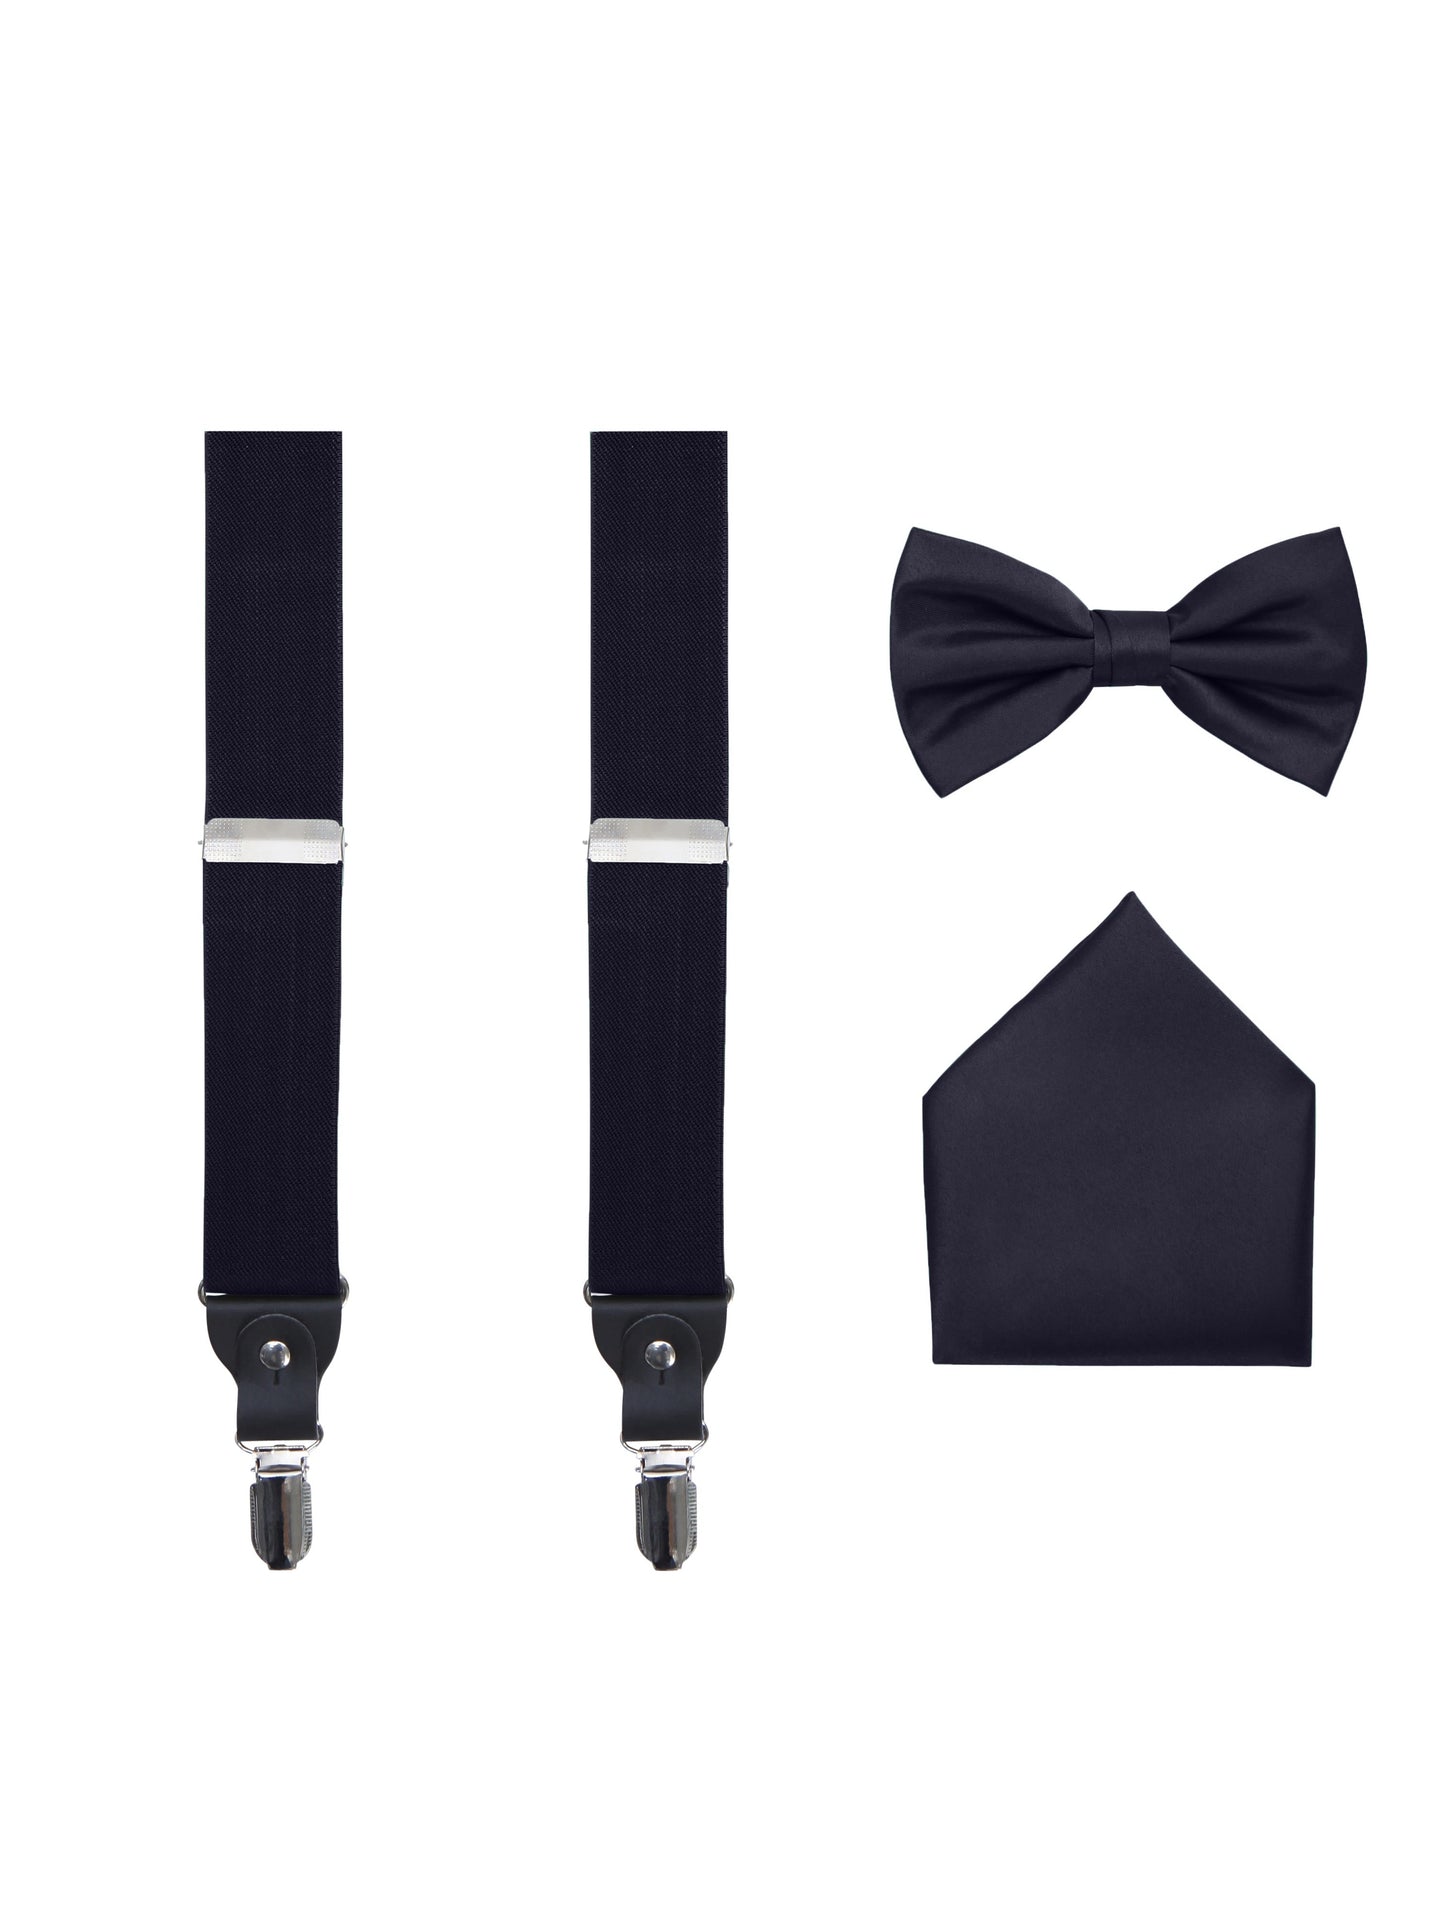 S.H. Churchill & Co. Men's 3 Piece Navy Suspender Set - Includes Suspenders, Matching Bow Tie, Pocket Hanky and Gift Box